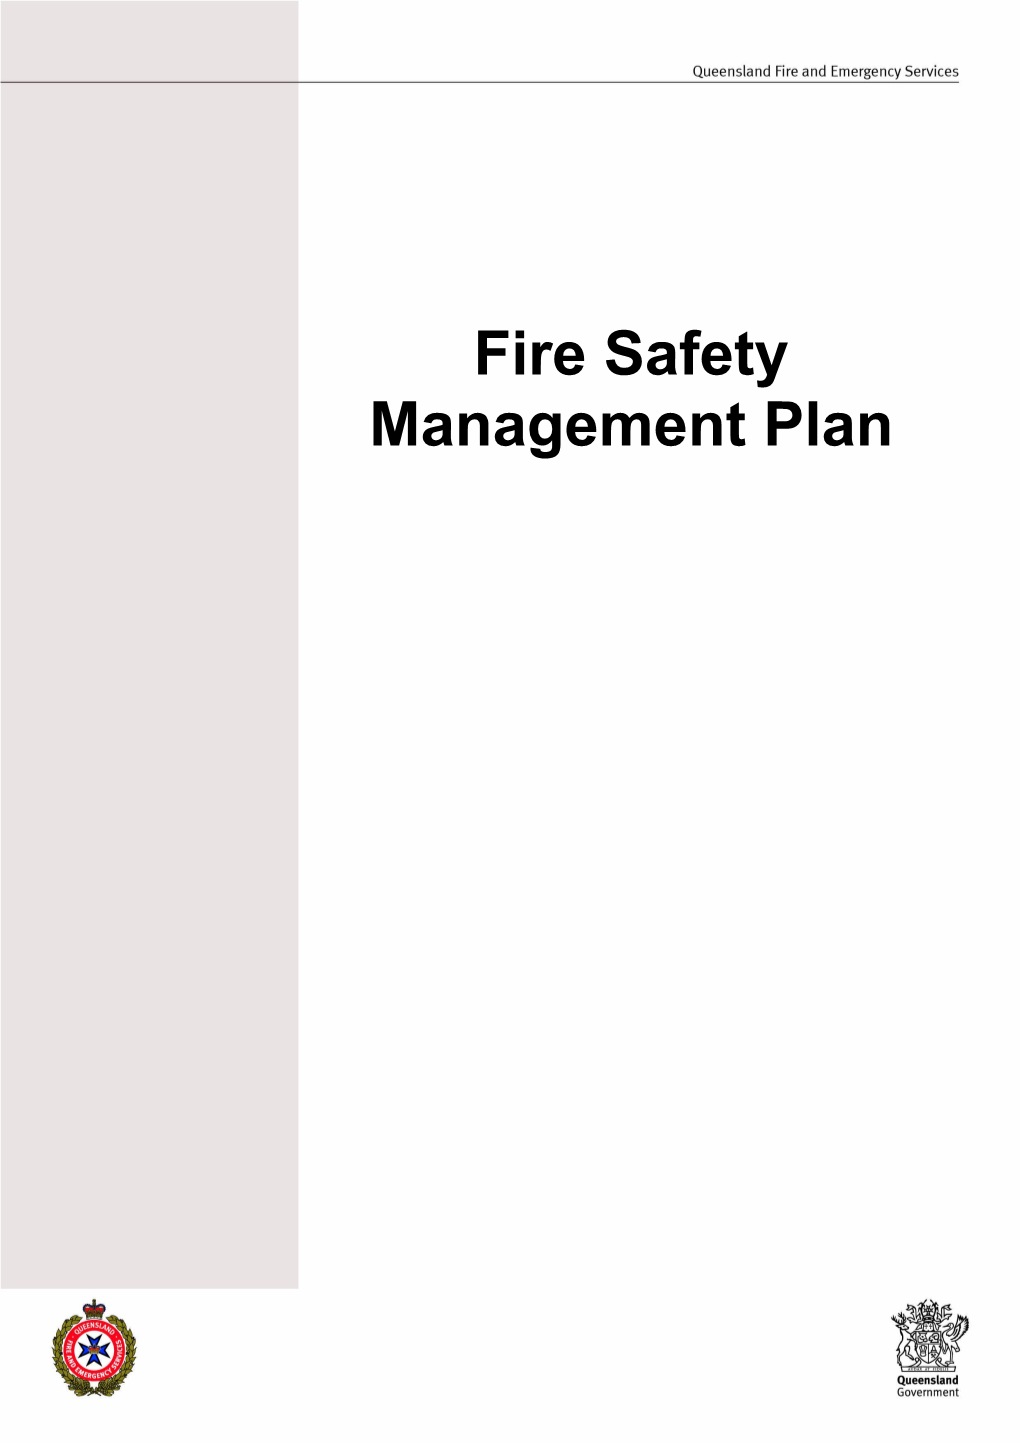 3.Proposed Maintenance Schedule Prescribed Fire Safety Installations